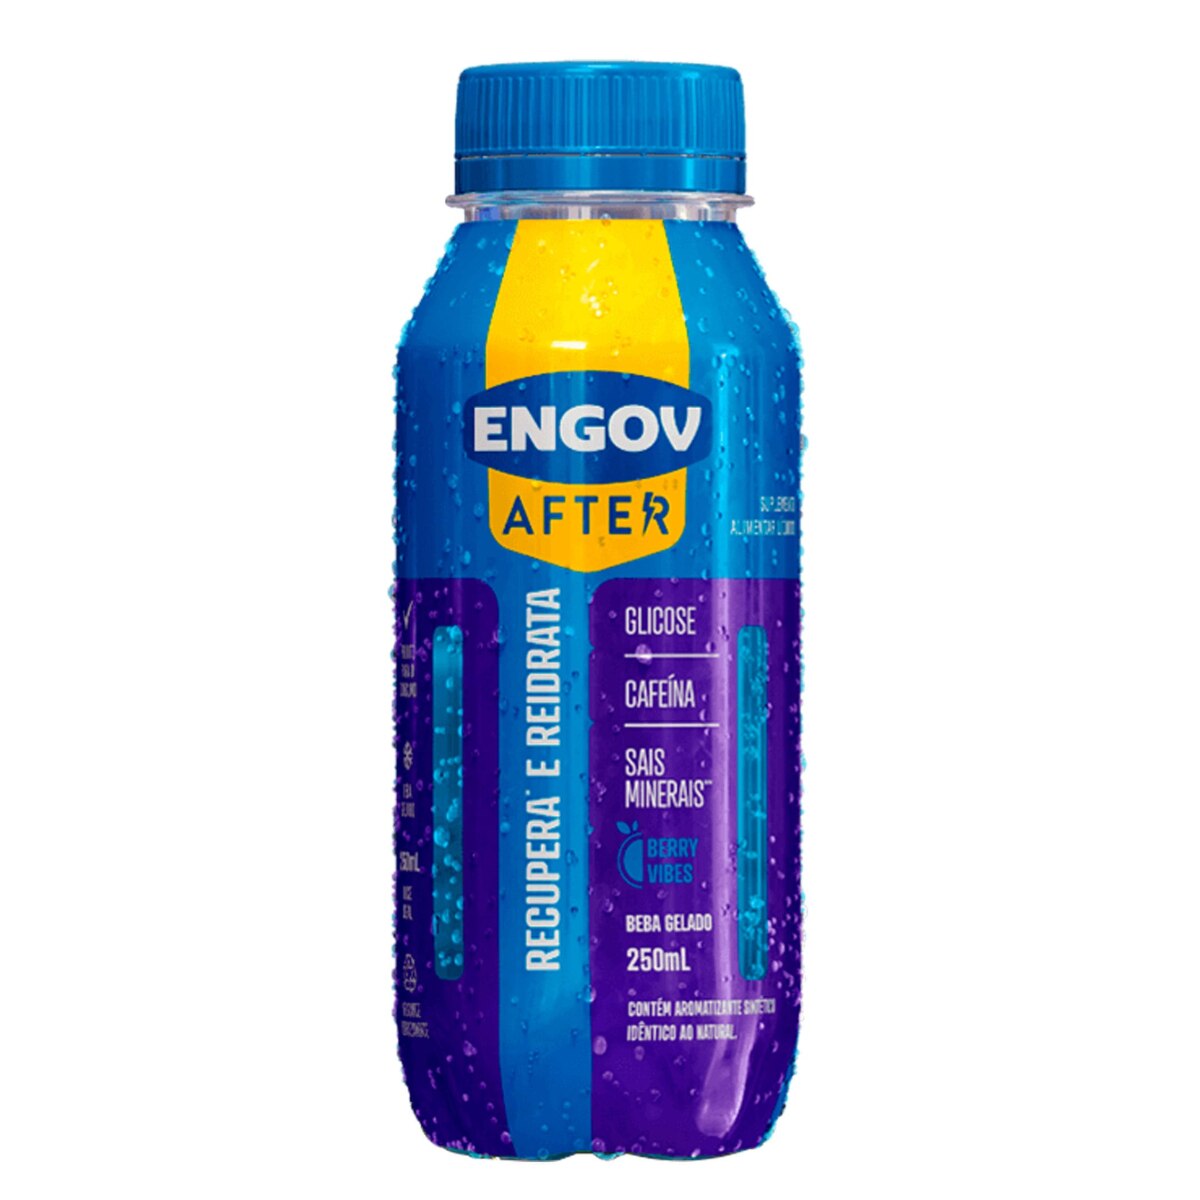 Engov After Sabor Berry Vibes 250ml